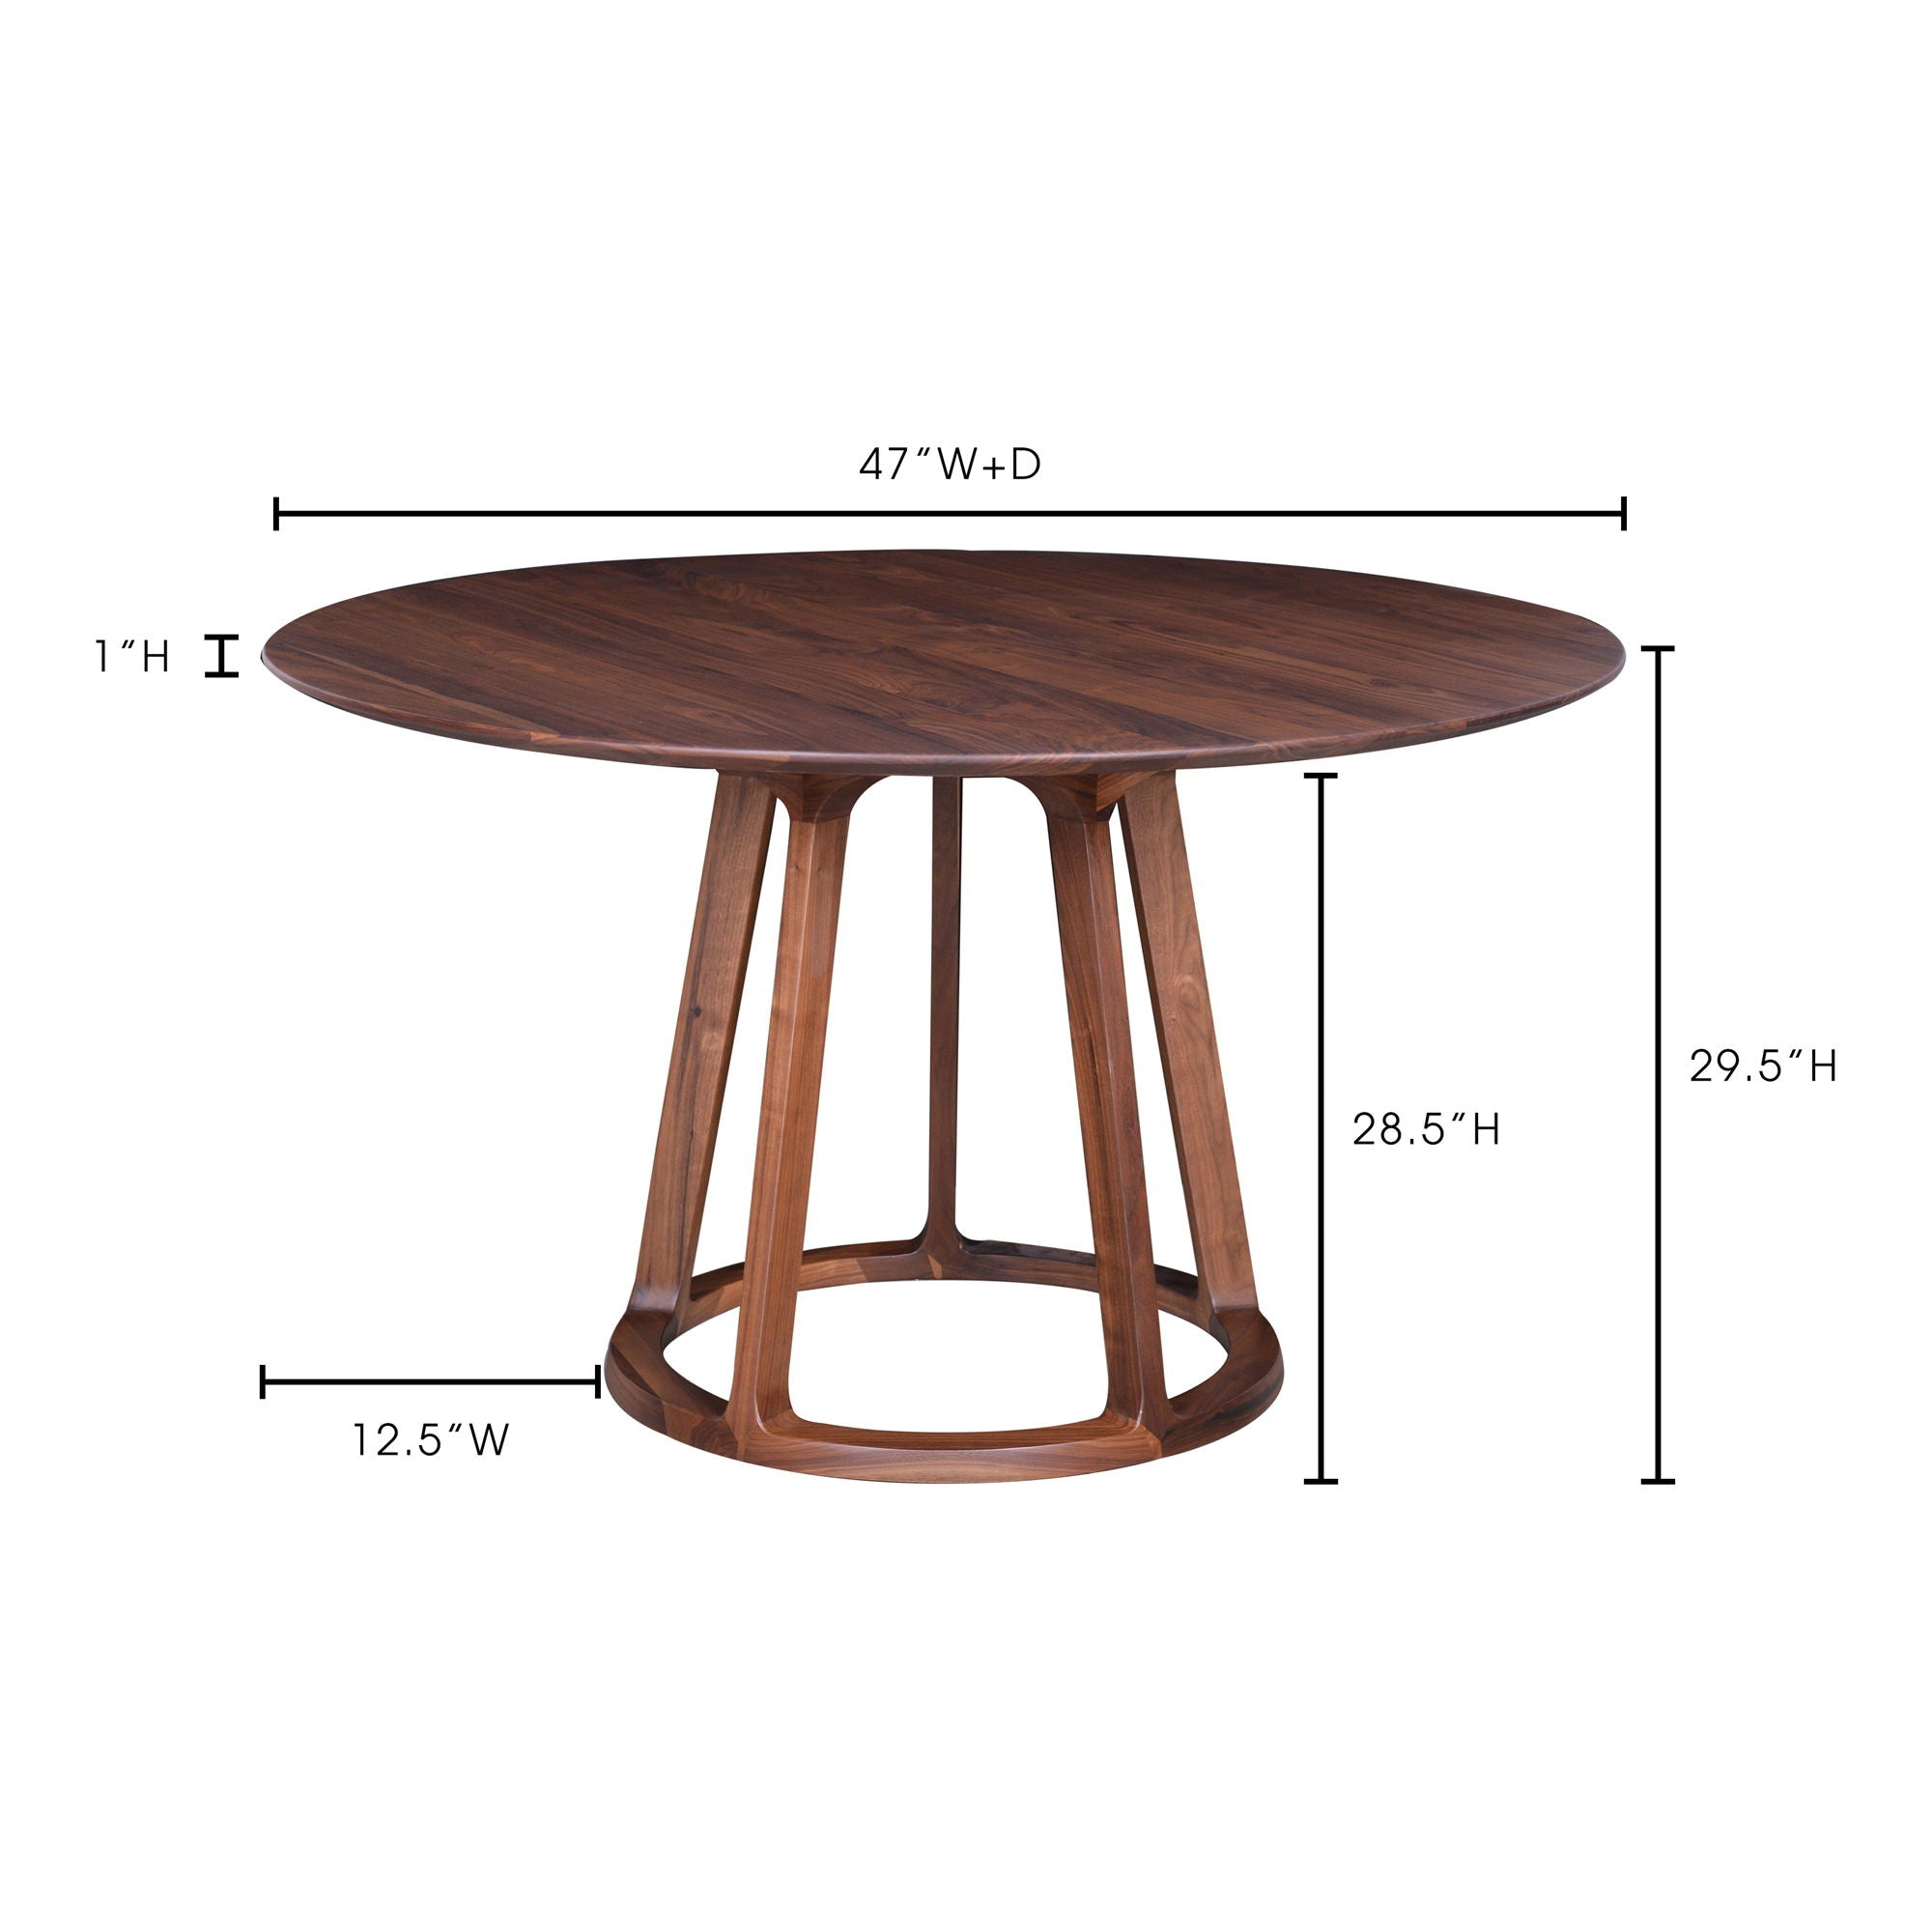 Aldo - Dining Table - Natural